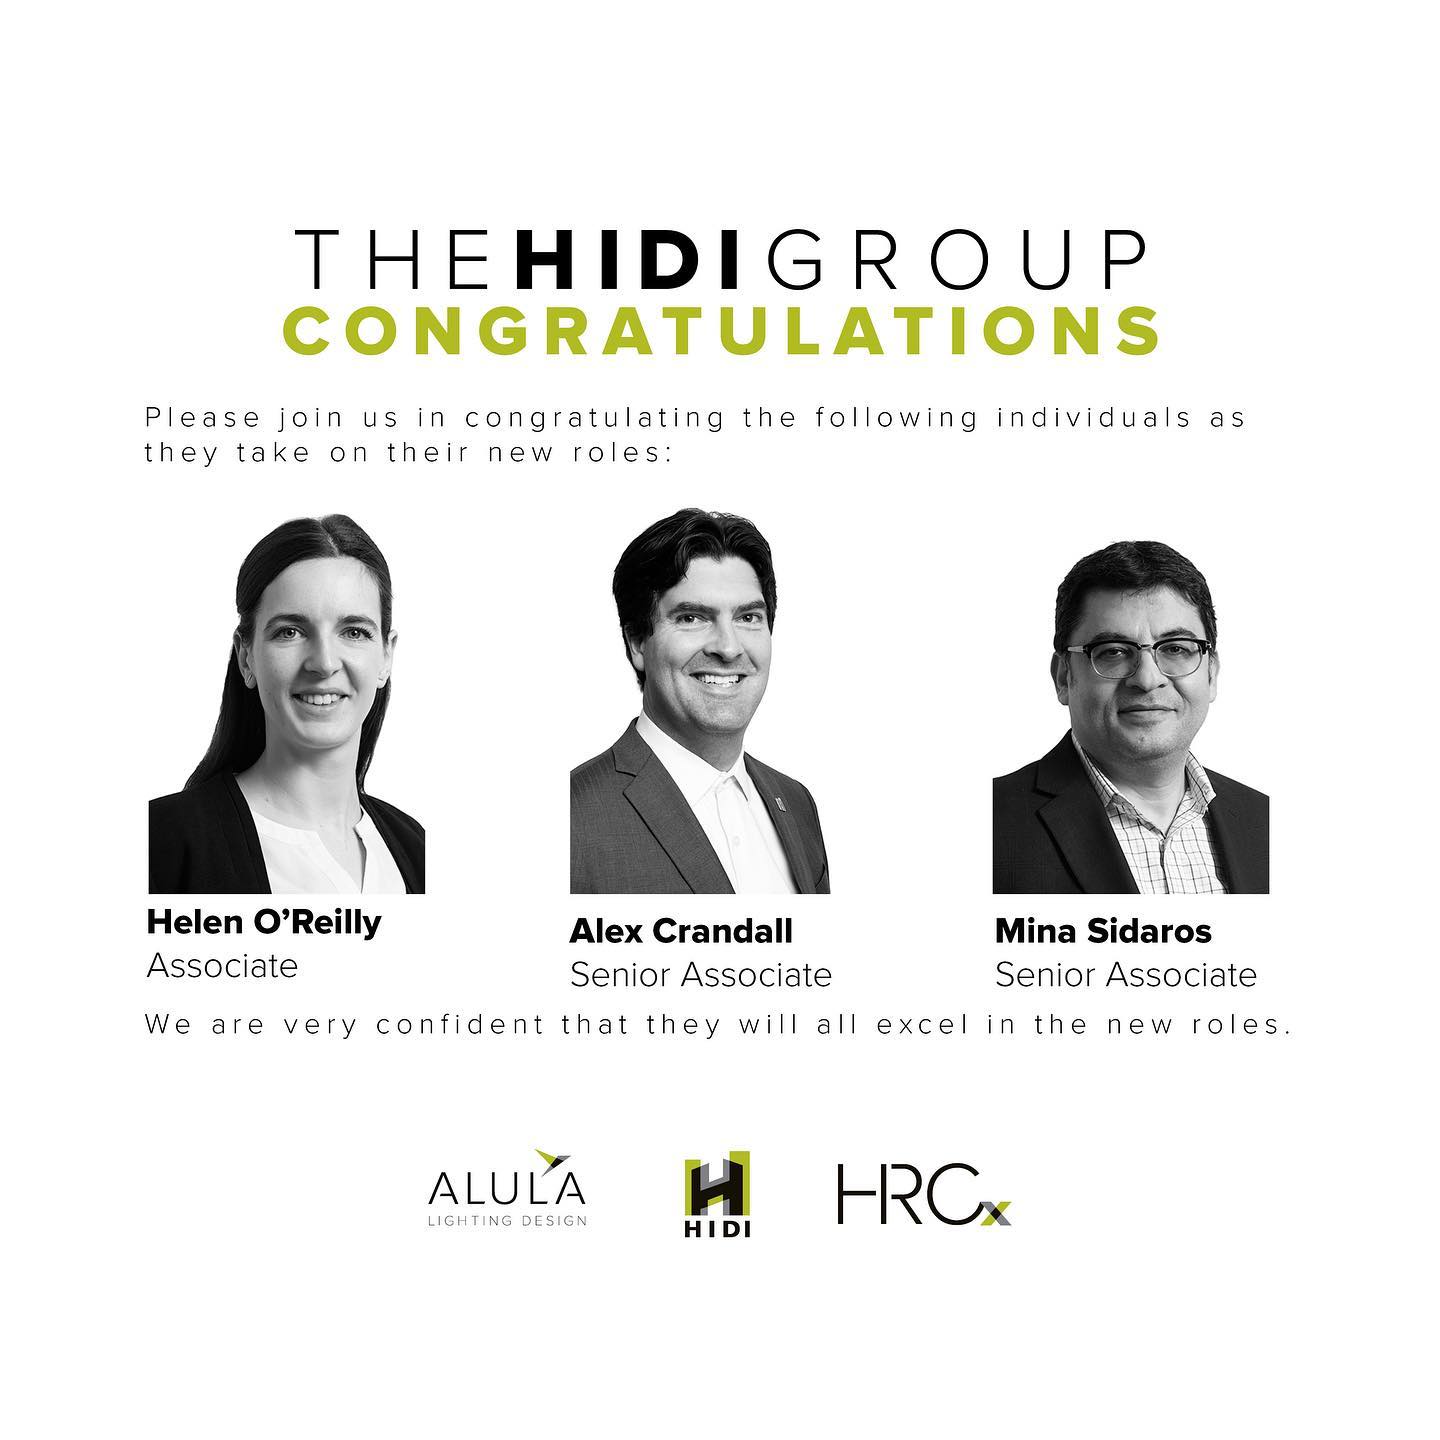 Please join us in congratulating  Helen O’Reilly, Alex Crandall, and Mina Sidaros as they take on their new roles within @thehidigroup. We are very confident that they will all excel in the new roles. #thg #engineeringtomorrow #congratulations